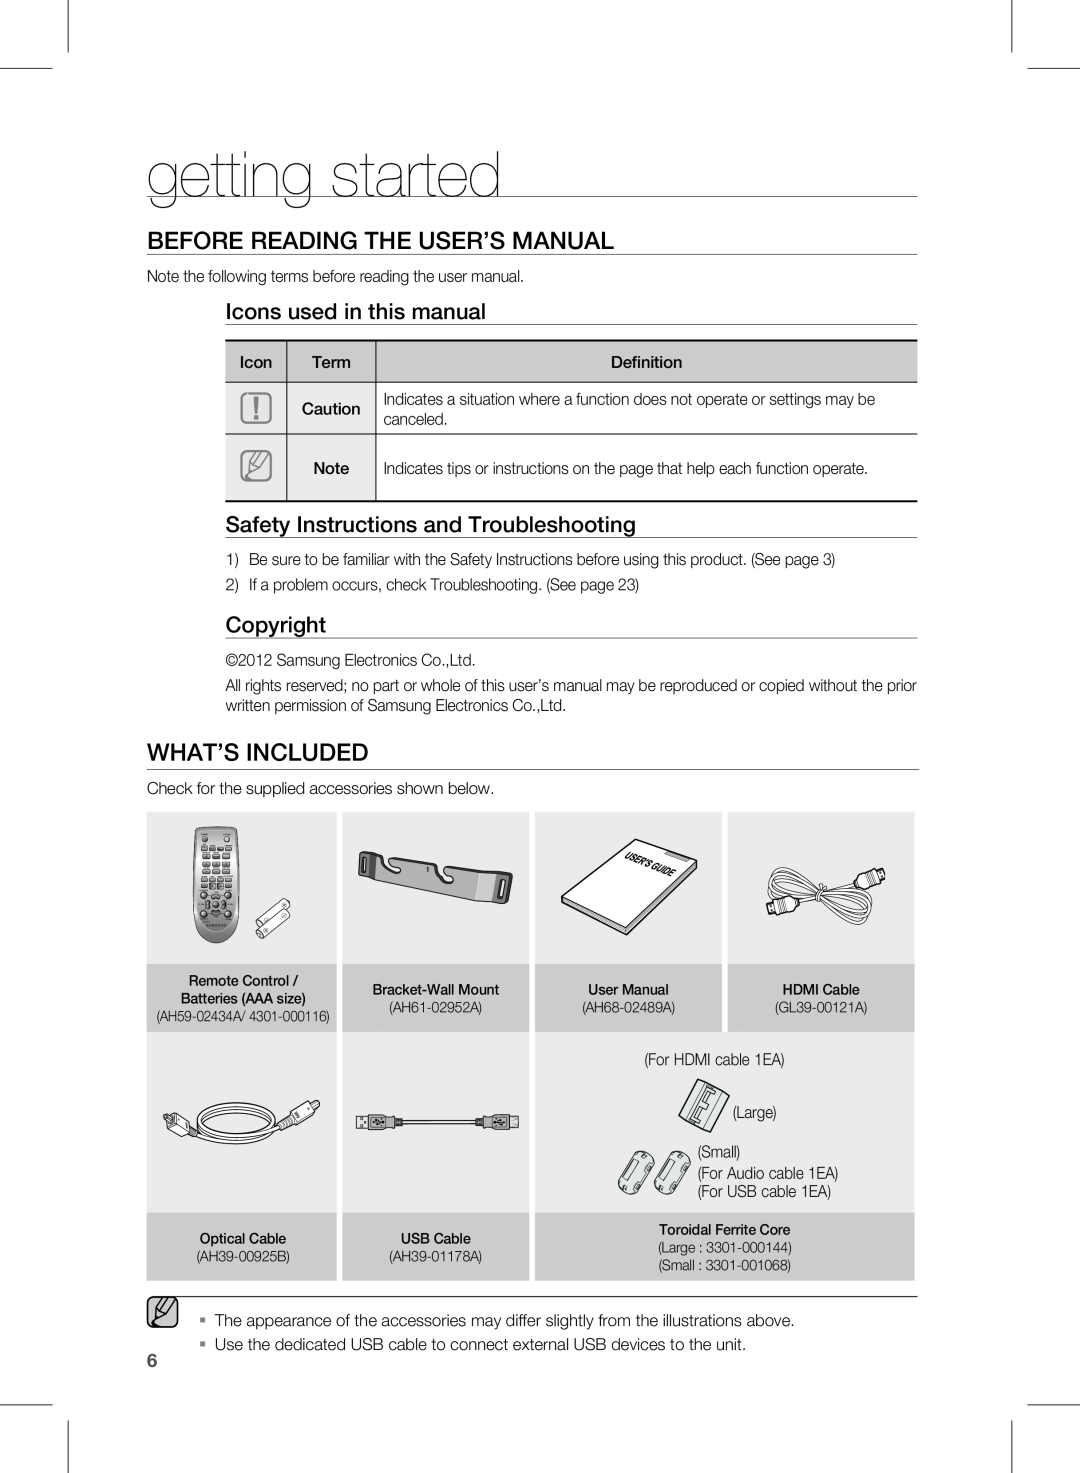 Samsung HW-E450C getting started, WHat’s incLUDeD, icons used in this manual, safety instructions and troubleshooting 